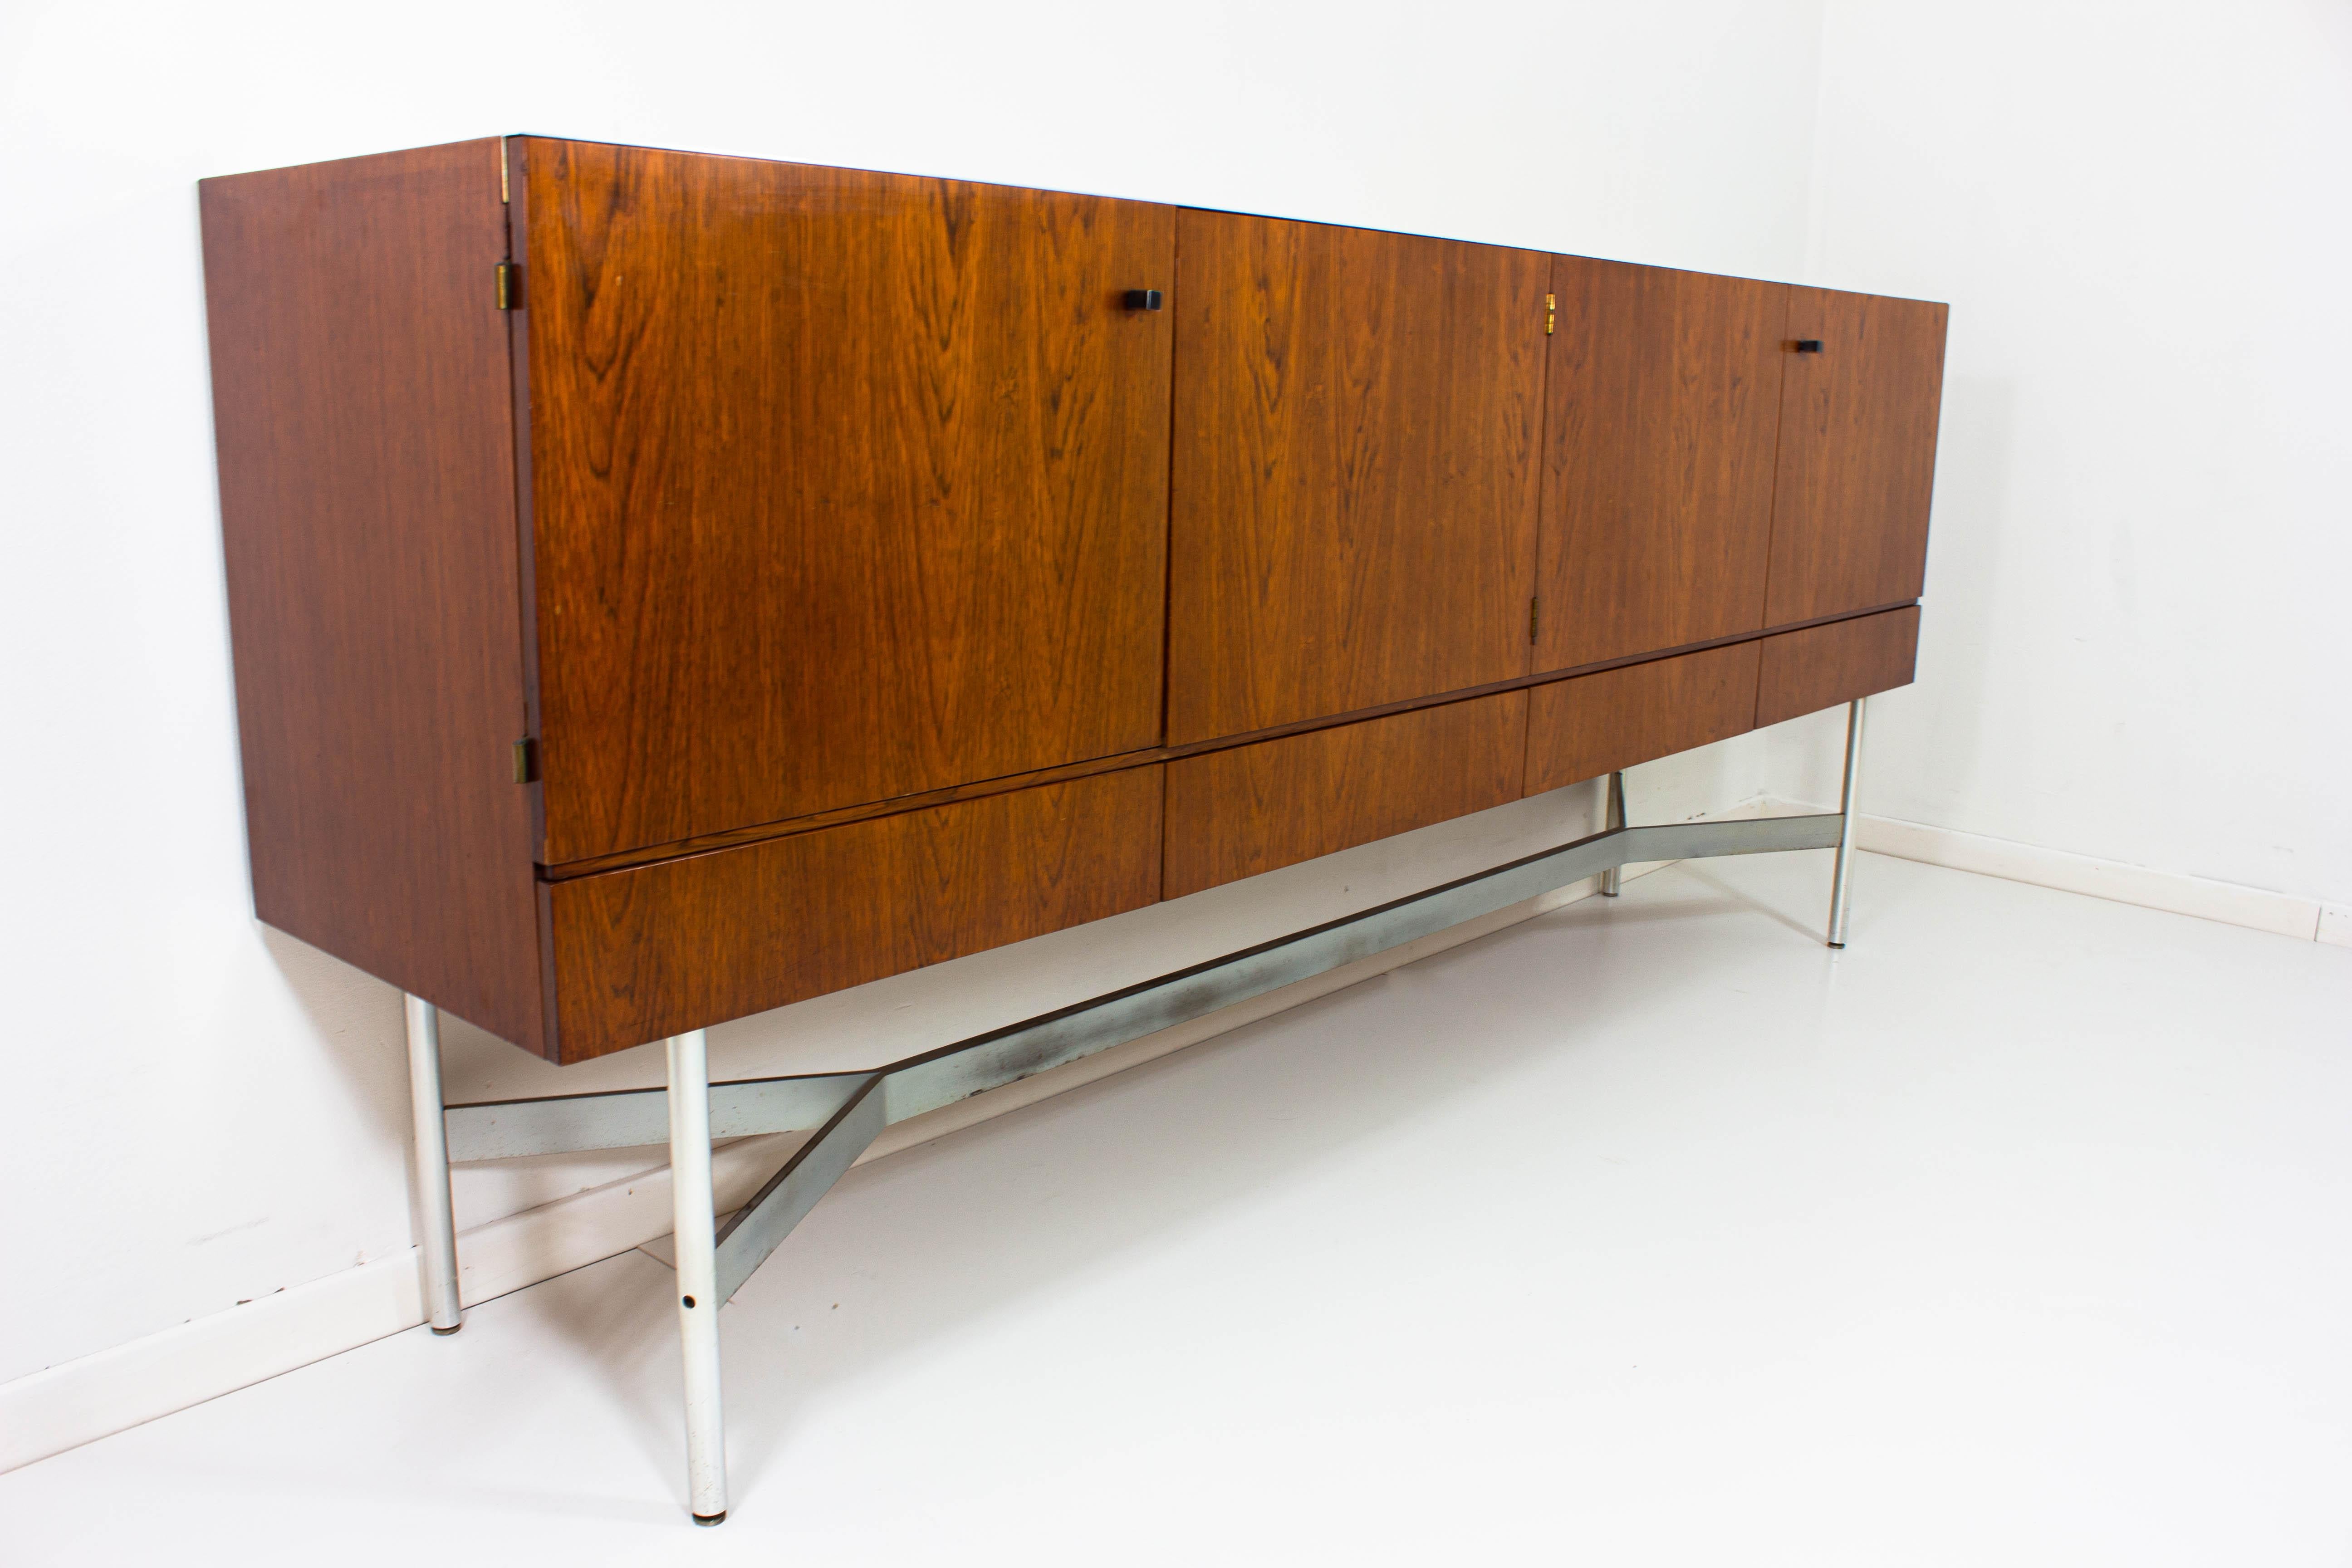 Very well crafted sideboard (and accompanying bar cabinet) with beautiful proportions. The elegant brushed metal base and legs contrast beautifully with the wooden body of the pieces. The veneered doors show a nice deep wooden pattern while the base